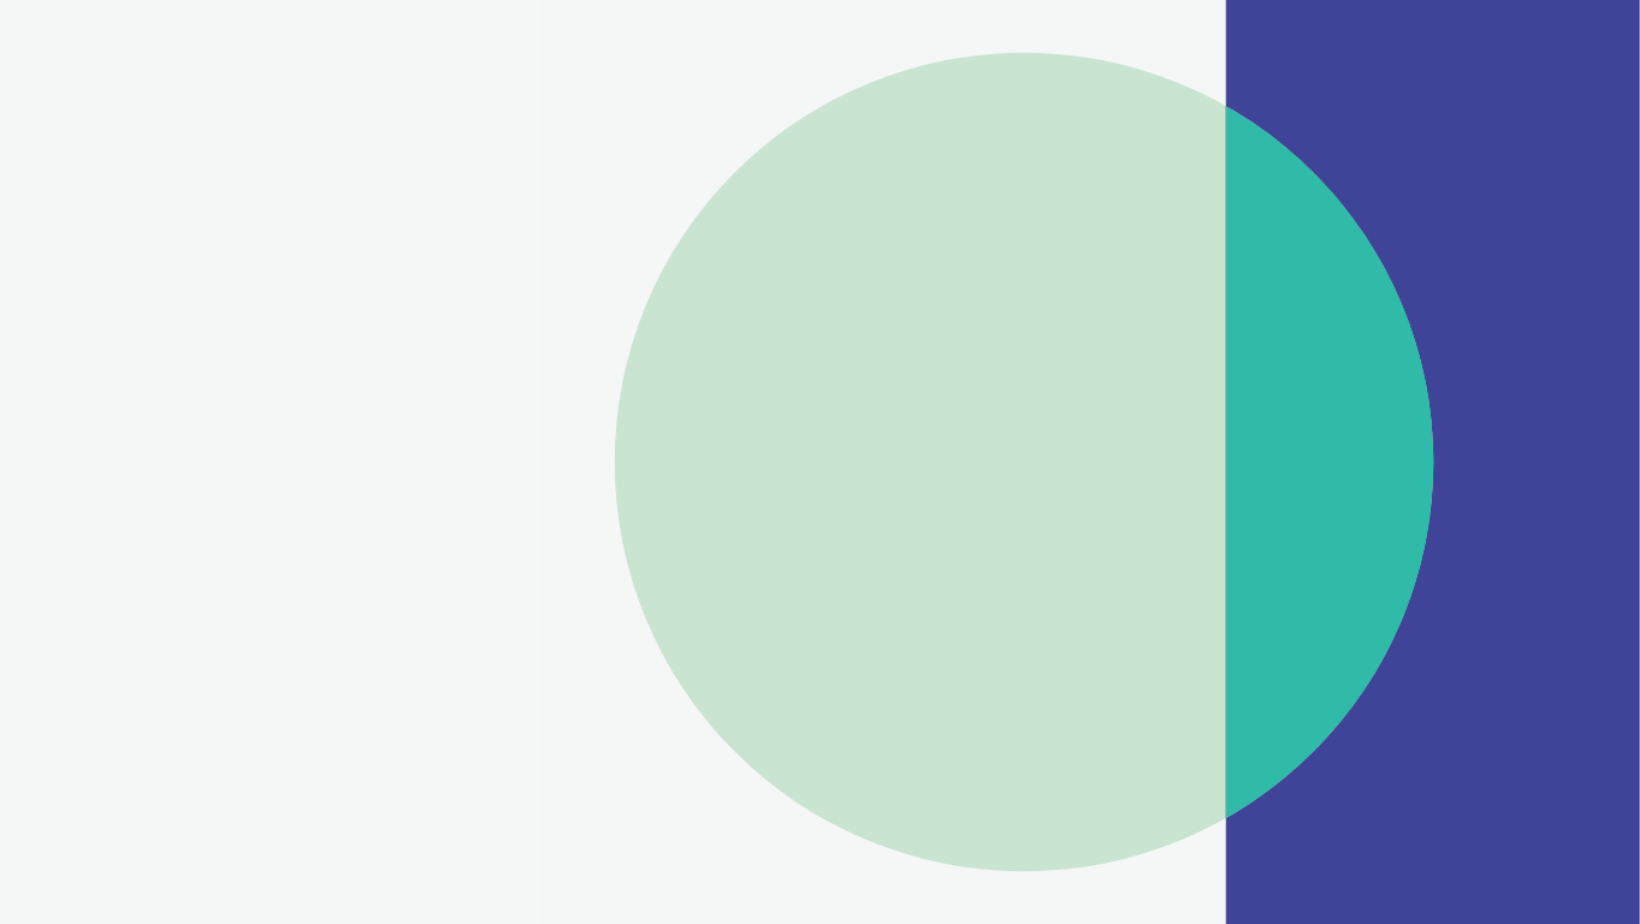 An image of a light blue circle, which overlaps with a violet square, with a teal intersection.